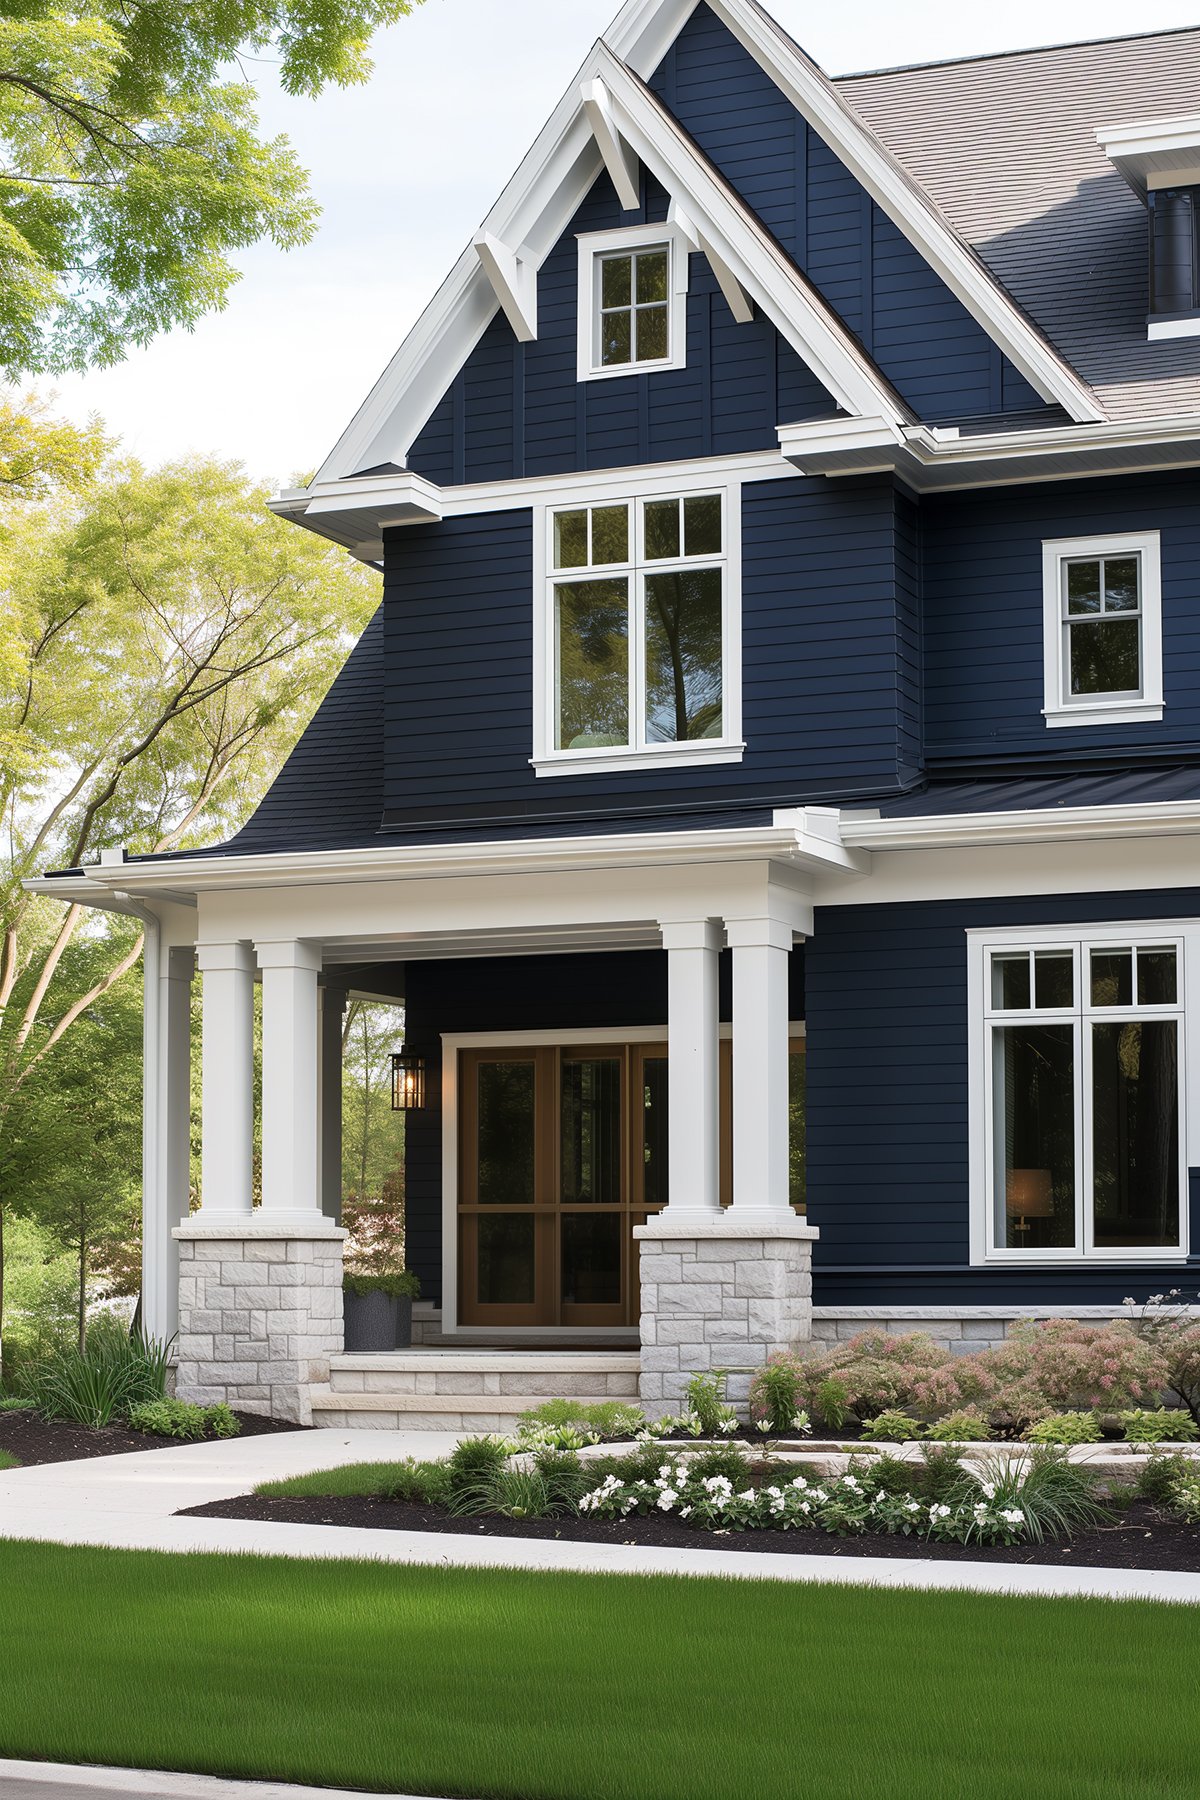 Modern house with BM Hale Navy siding and bright white trim with light gray brick accents.